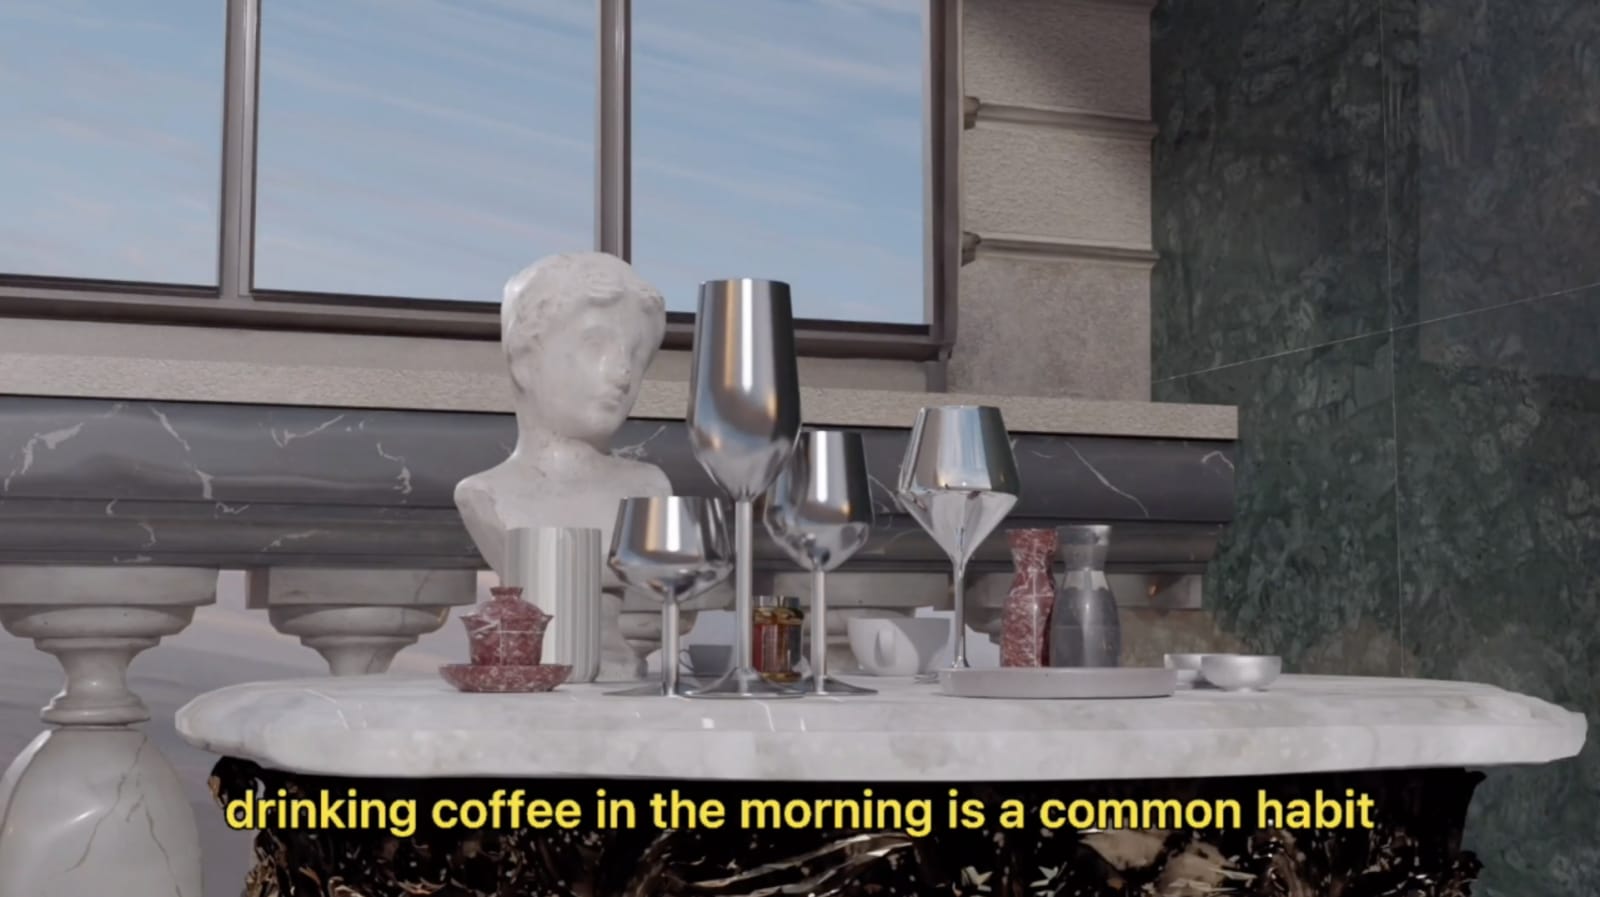 Image of room with caption: drinking coffee in the morning is a common habit.